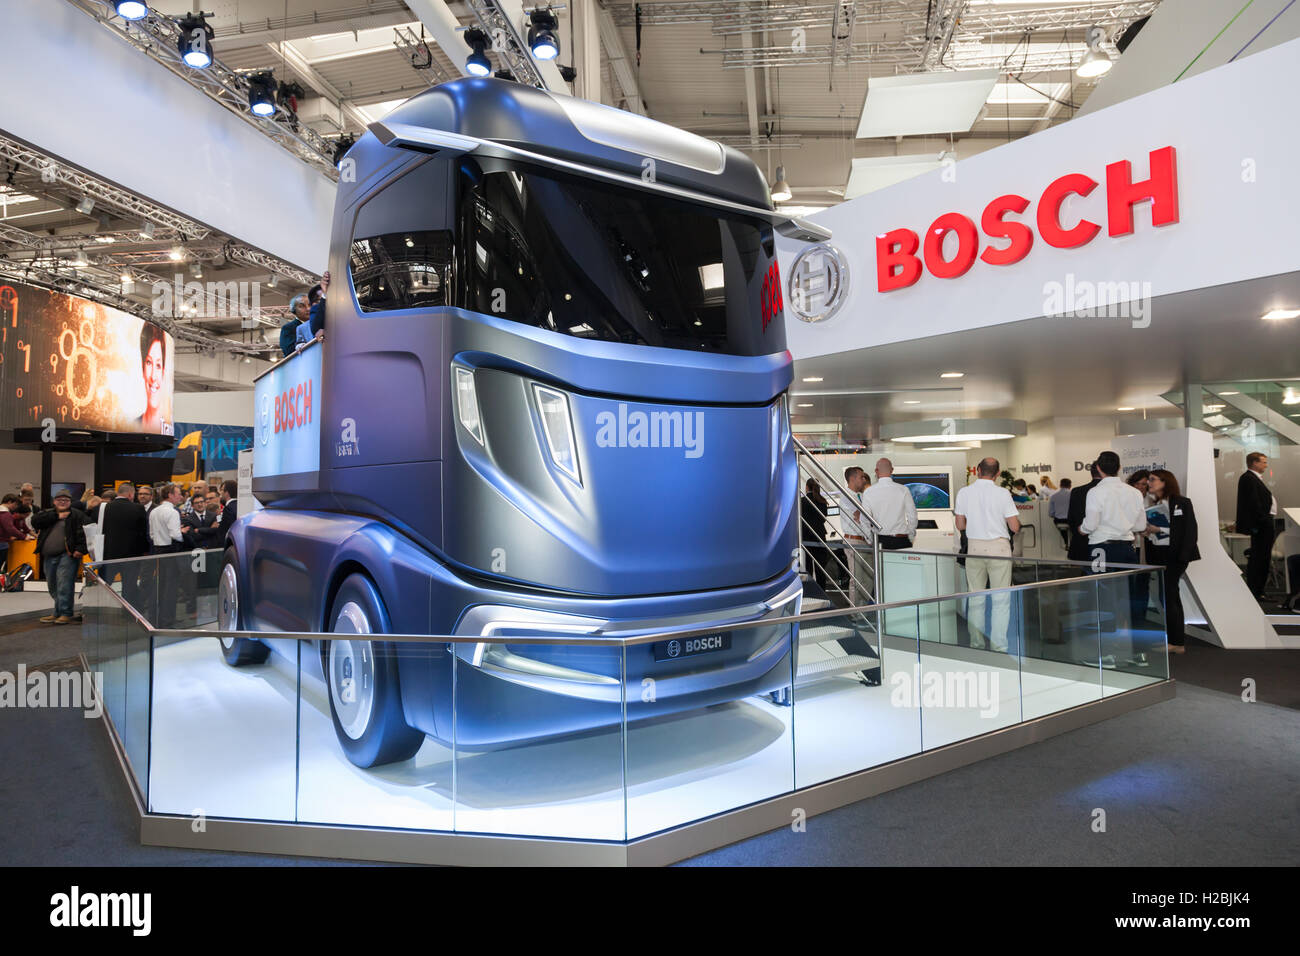 Bosch High Resolution Stock Photography and Images - Alamy